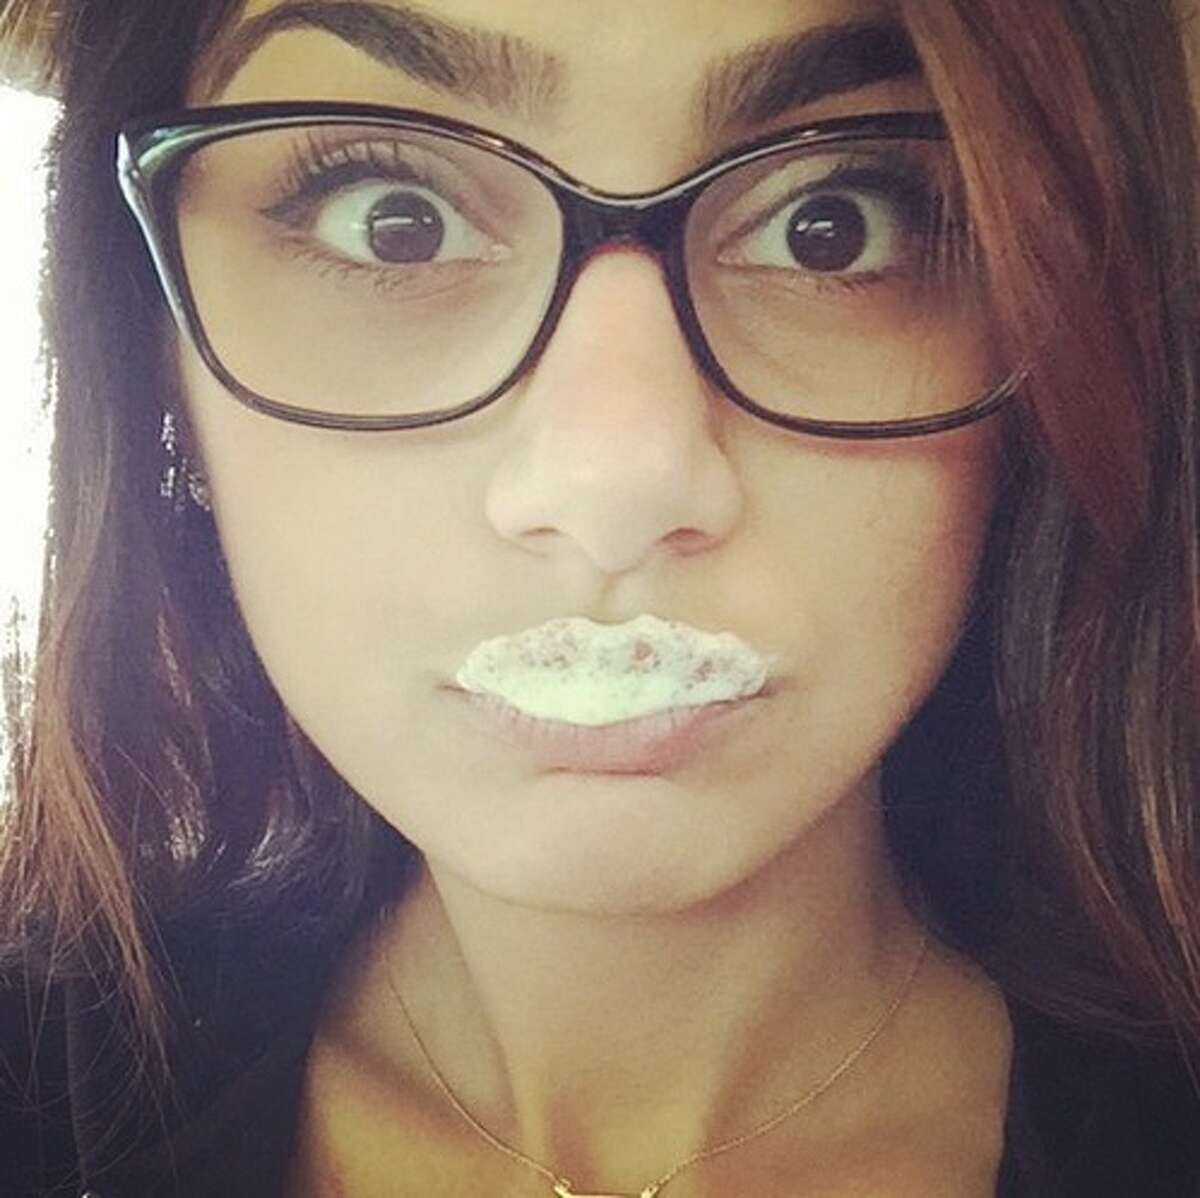 Whataburger To Mia Khalifa A Popular Porn Star With Texas Ties Who Wants Franchise No Thank You